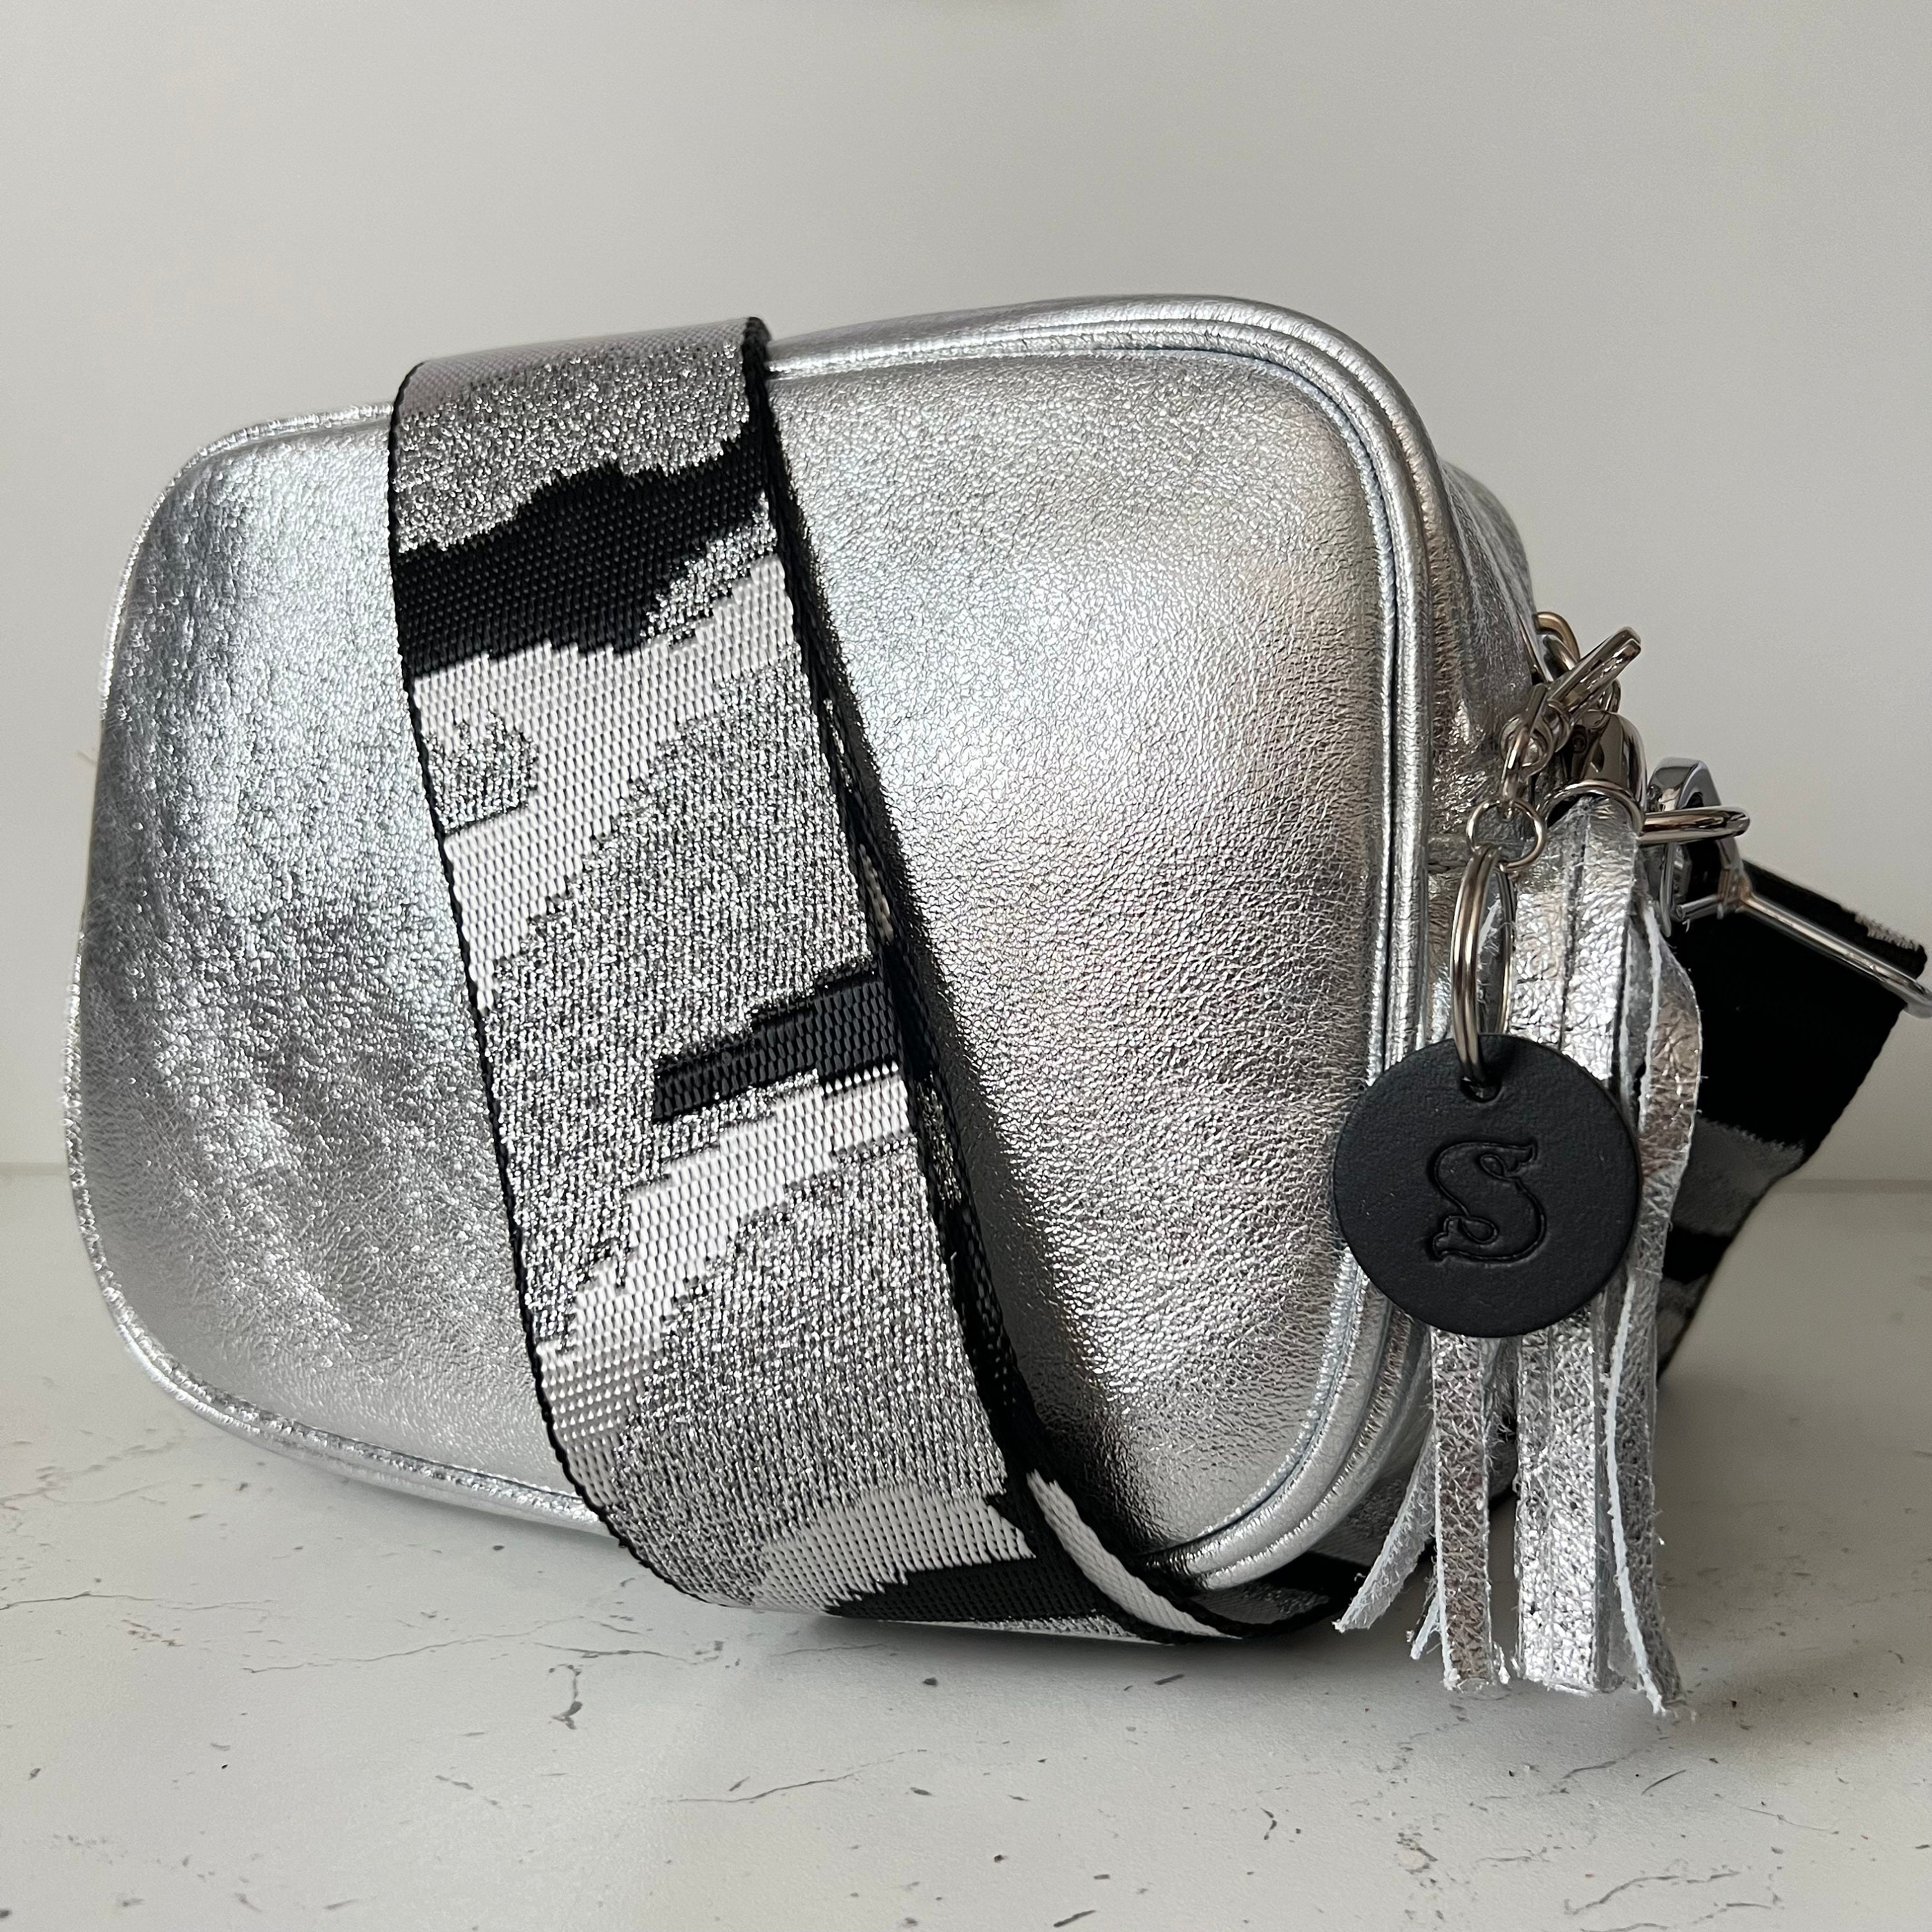 Handmade Silver Leather Bag With the Golden Chain 